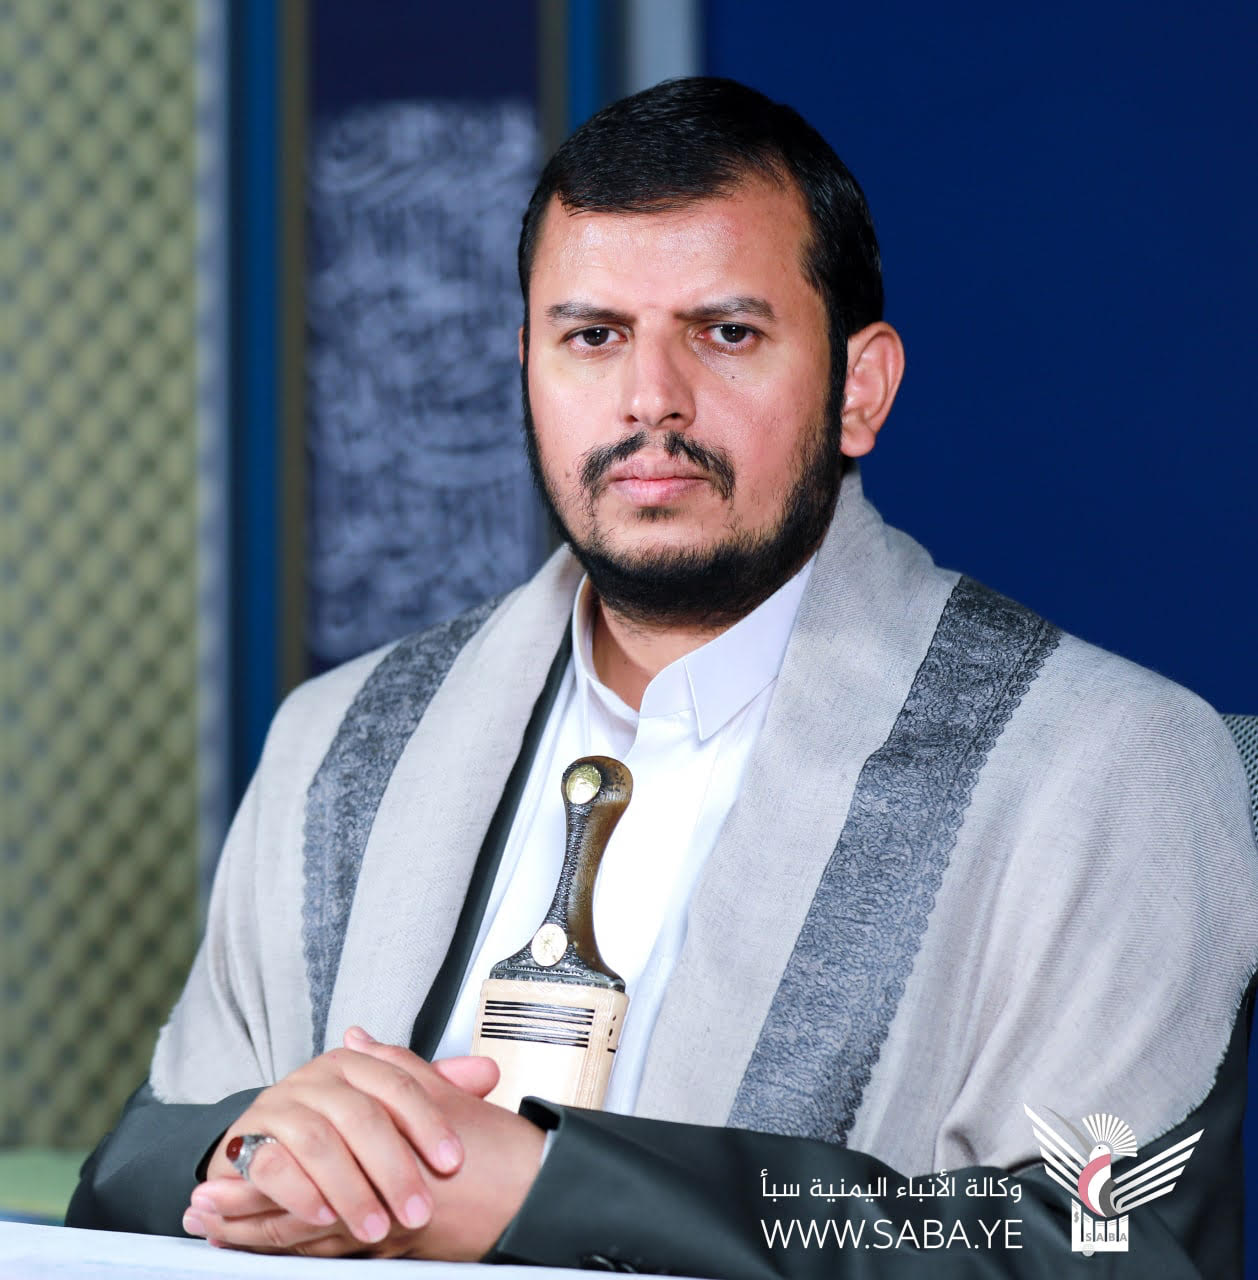 Revolution Leader: Continuing to defend Yemen and defeating occupation are among main goals of September 21 revolution